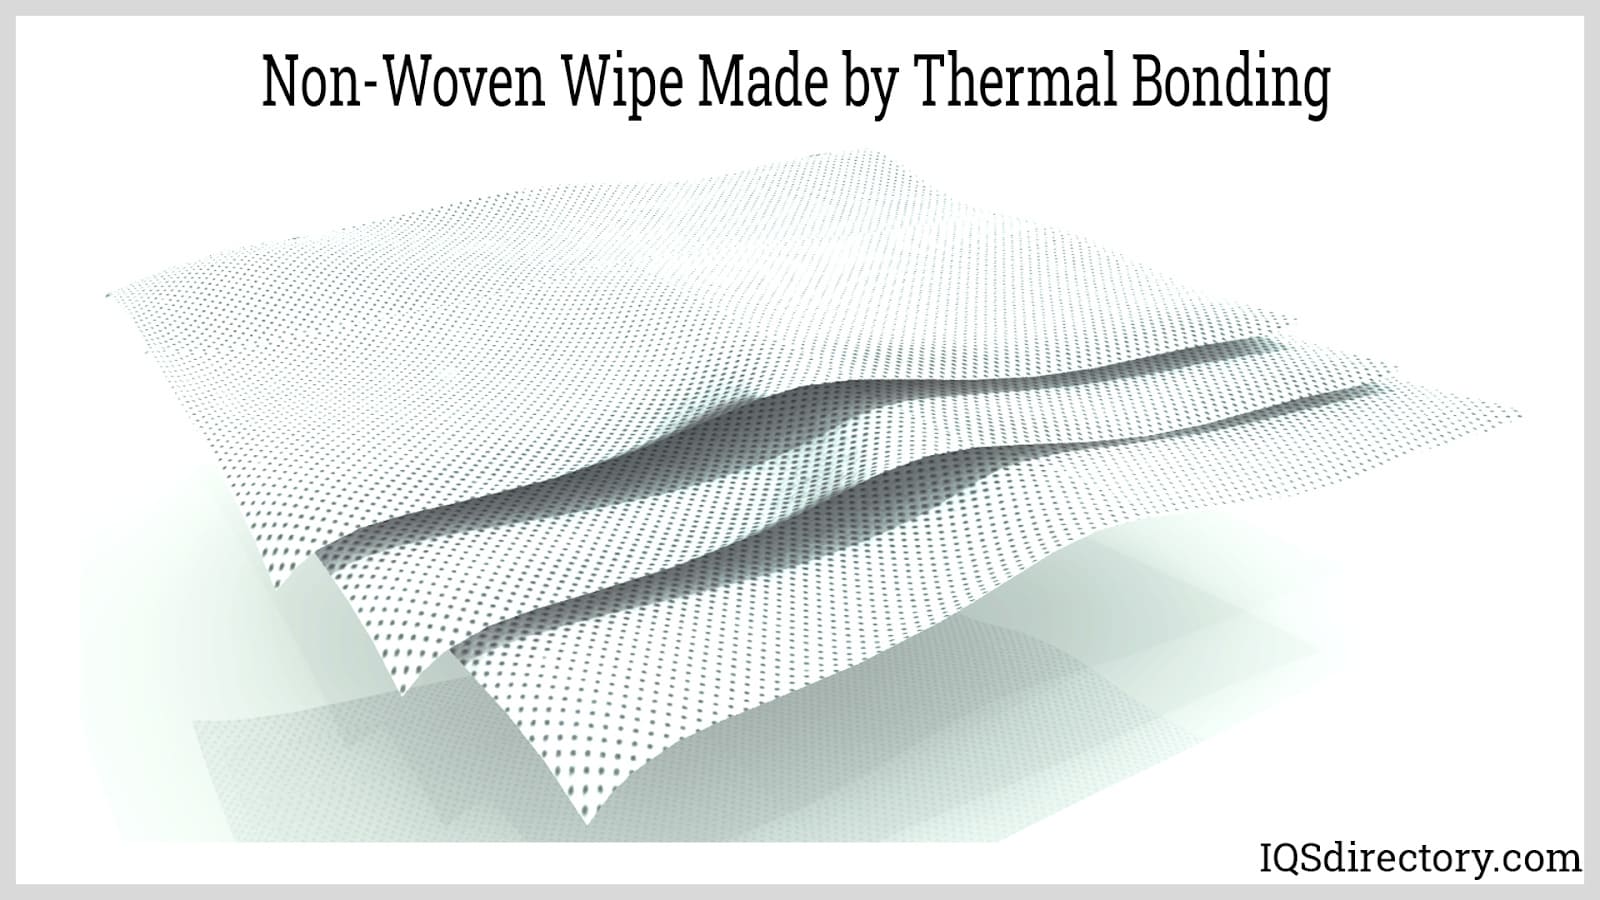 Non-Woven Wipe Made by Thermal Bonding